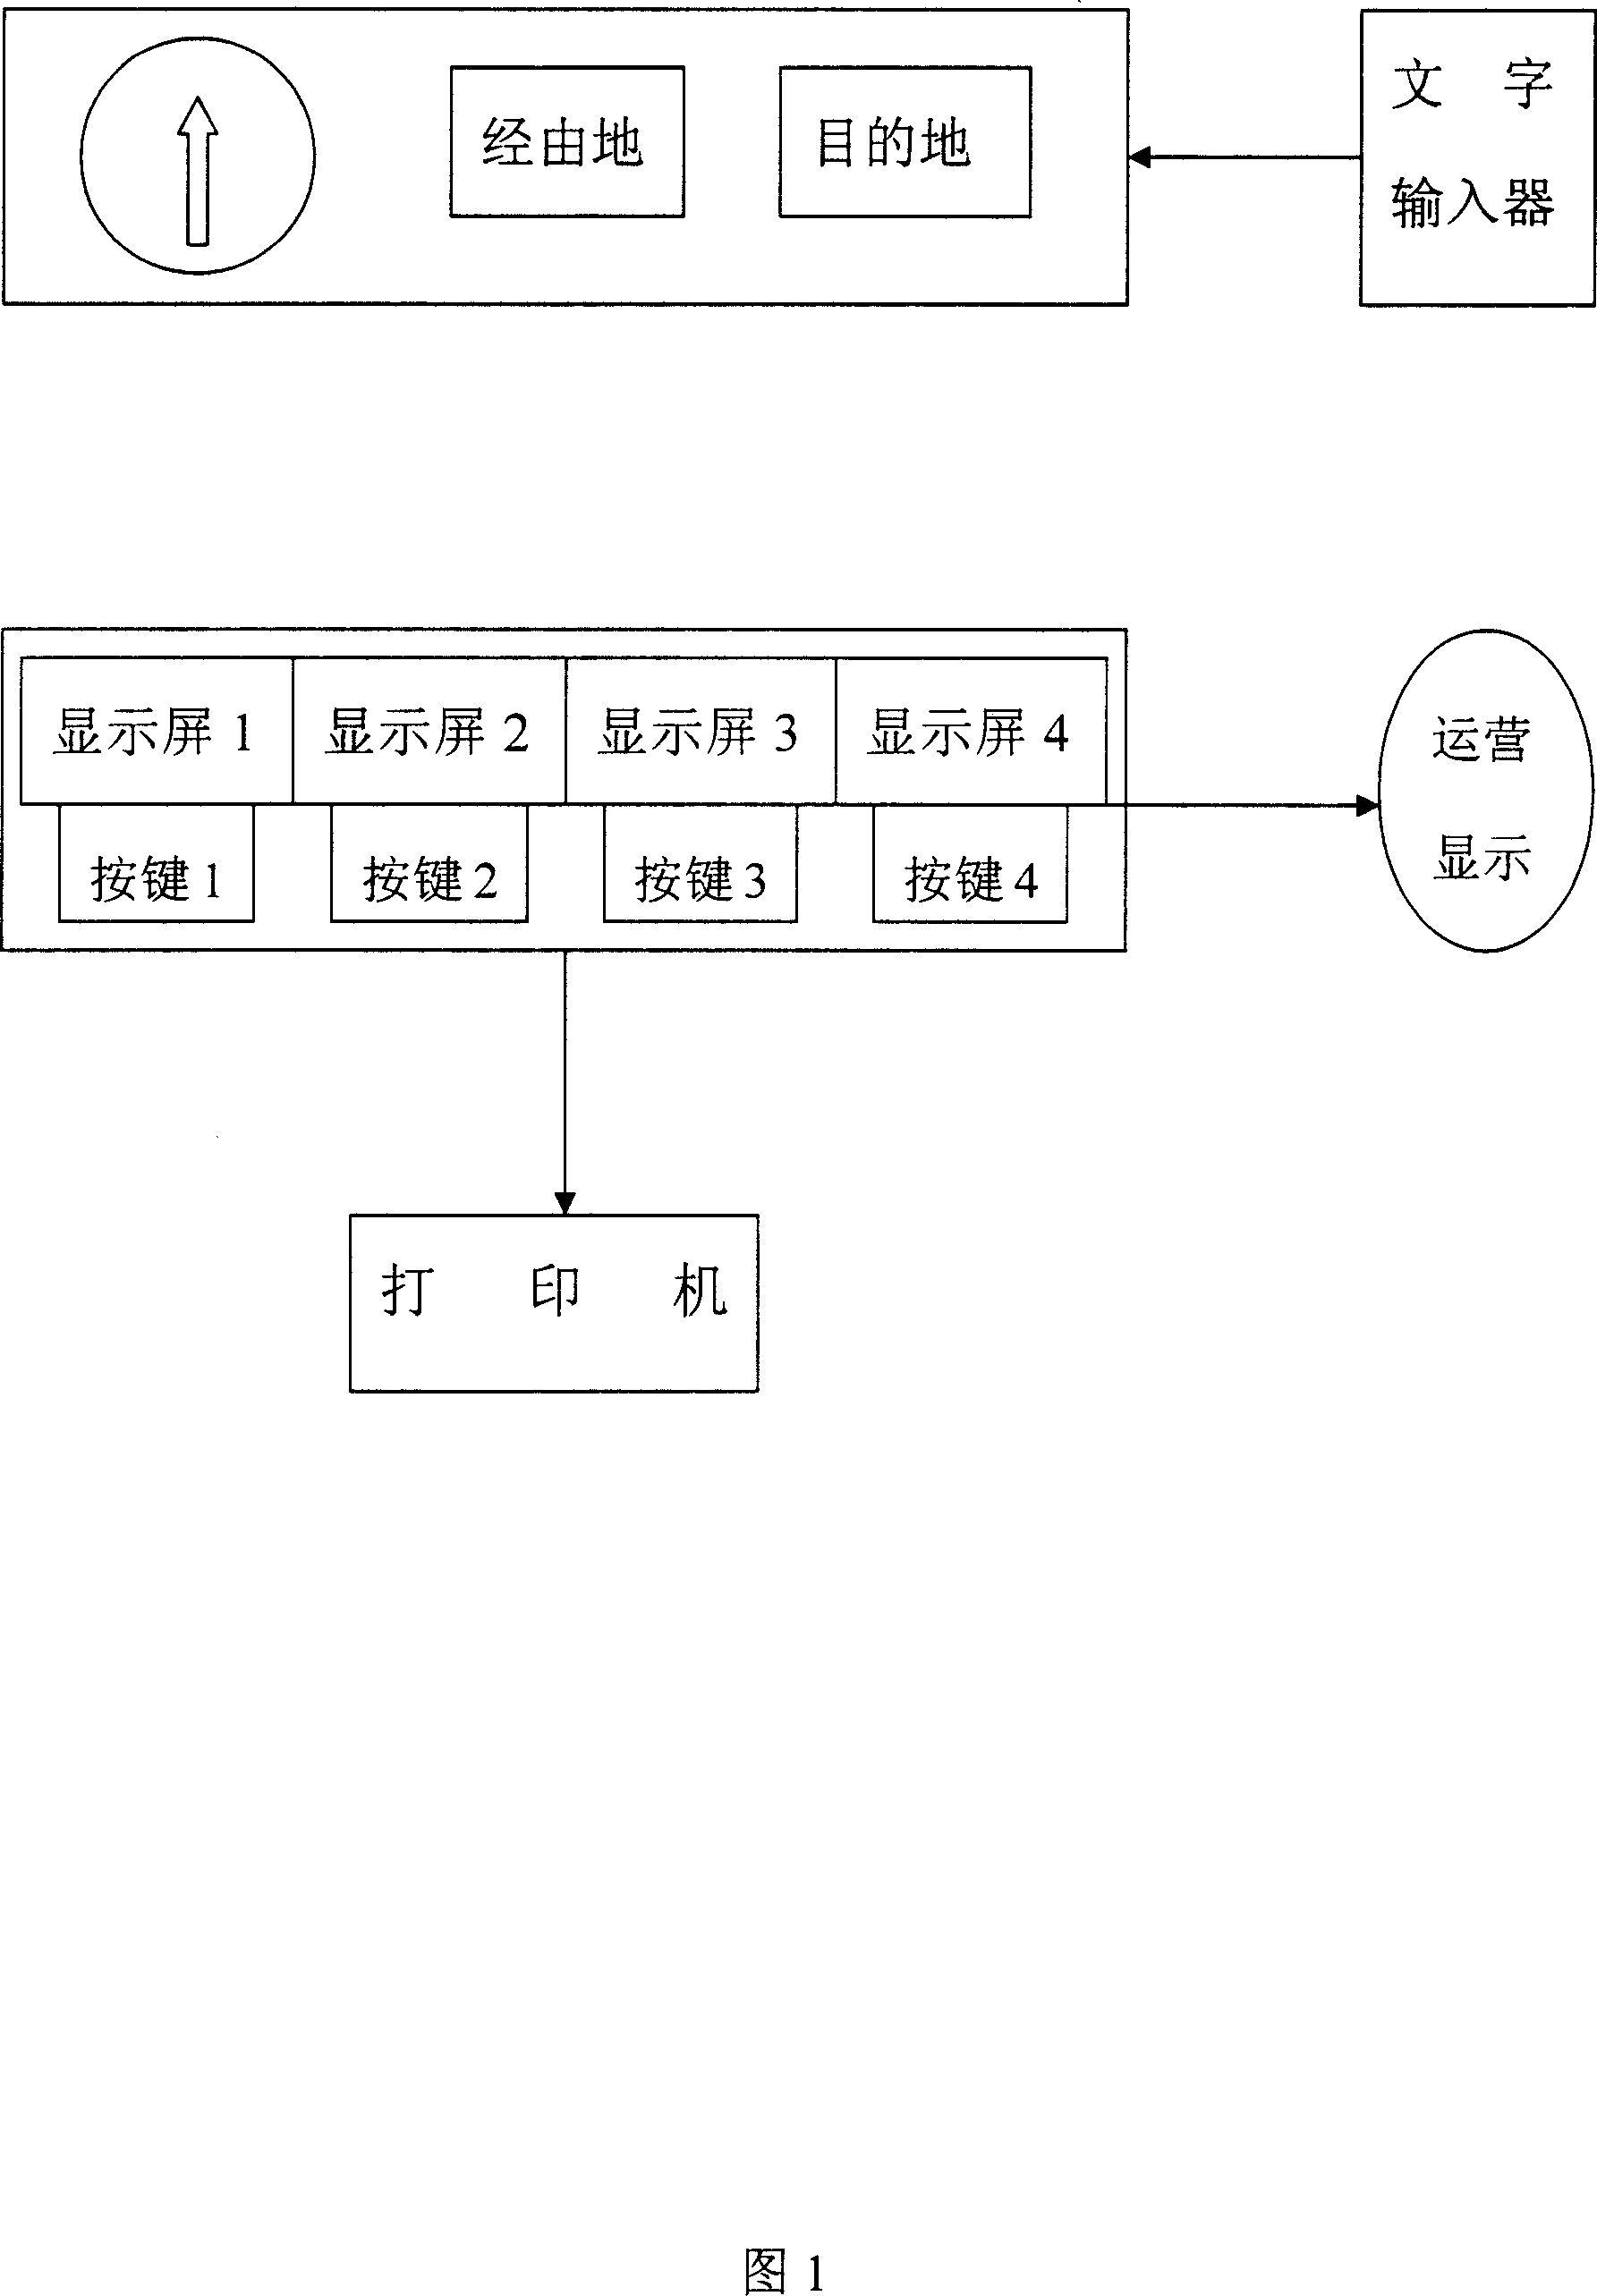 Charging and display system of taxi